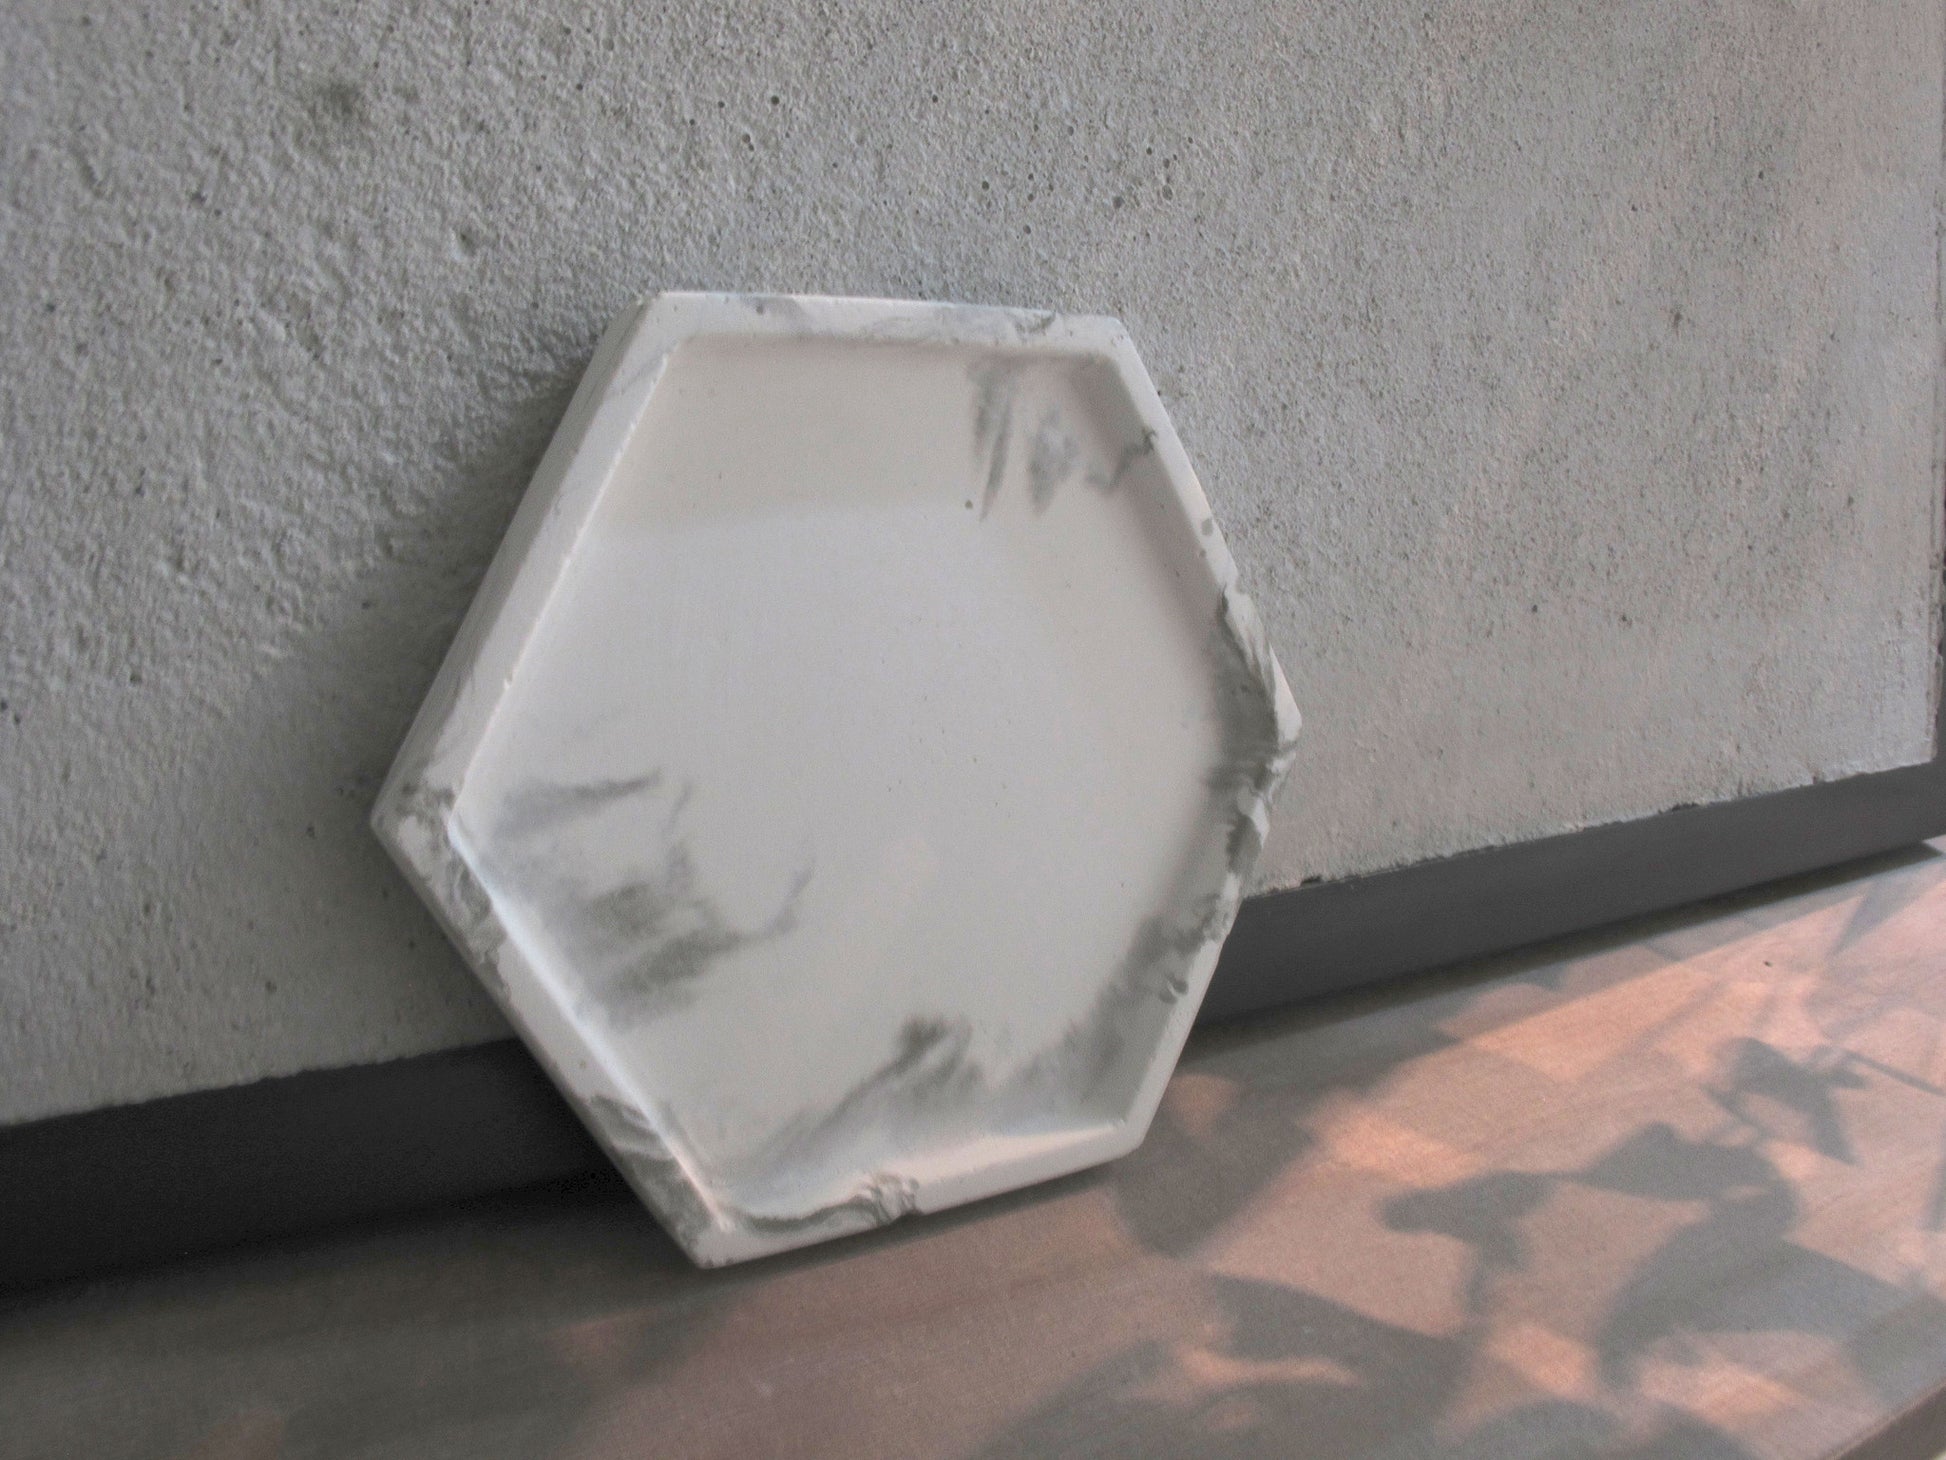 White marble patterned concrete tray / accessory holder in Hexagon shape